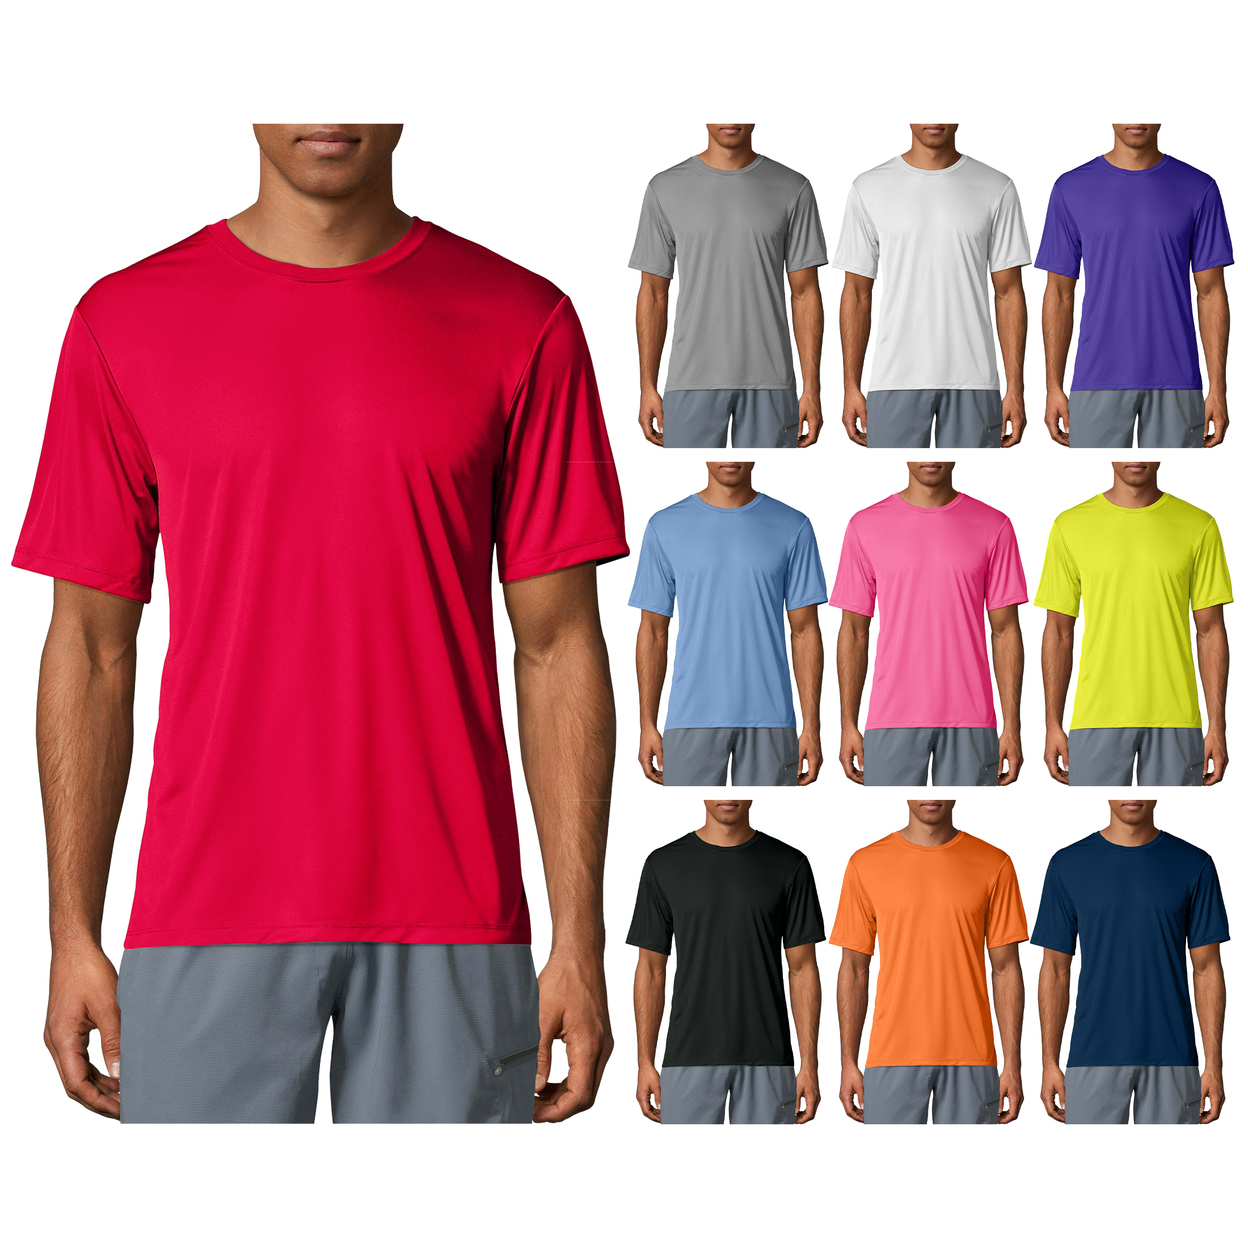 Multi-Pack: Men's Moisture Wicking Cool Dri-Fit Performance Short Sleeve Crew Neck T-Shirts - 3-pack, Large